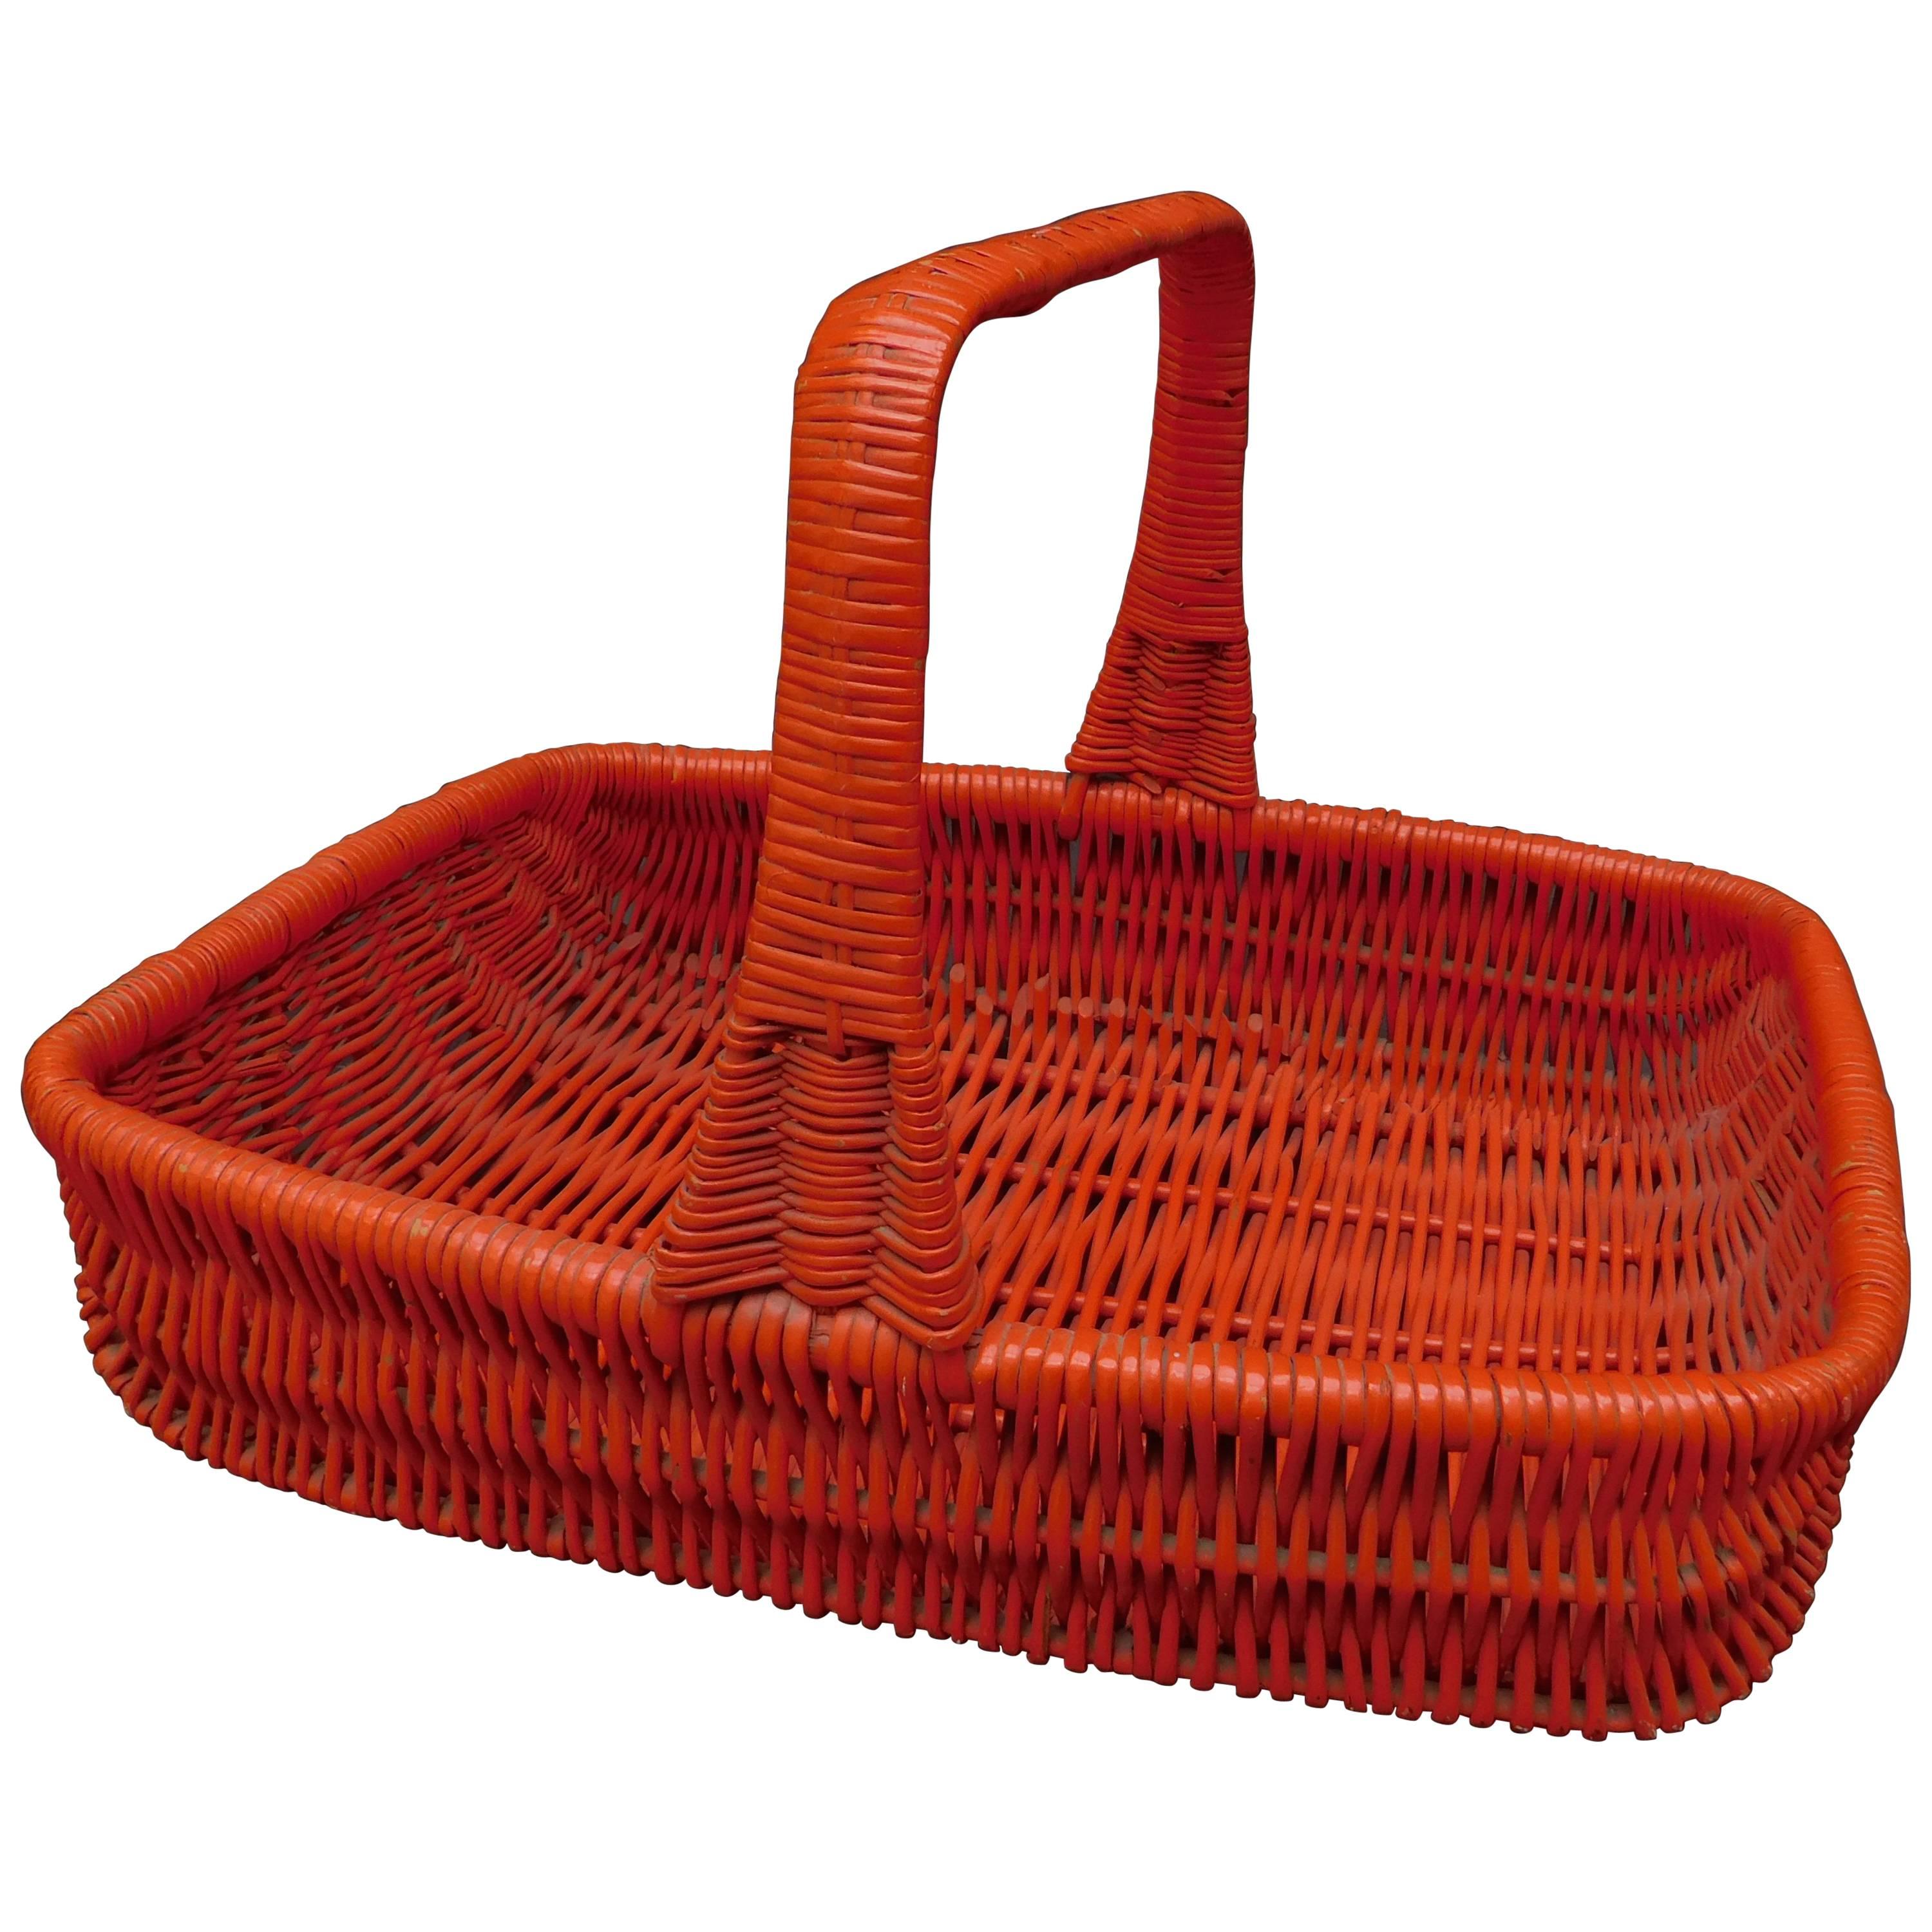 Antique French Wicker Orange Lacquered Garden Basket to Gather Flowers